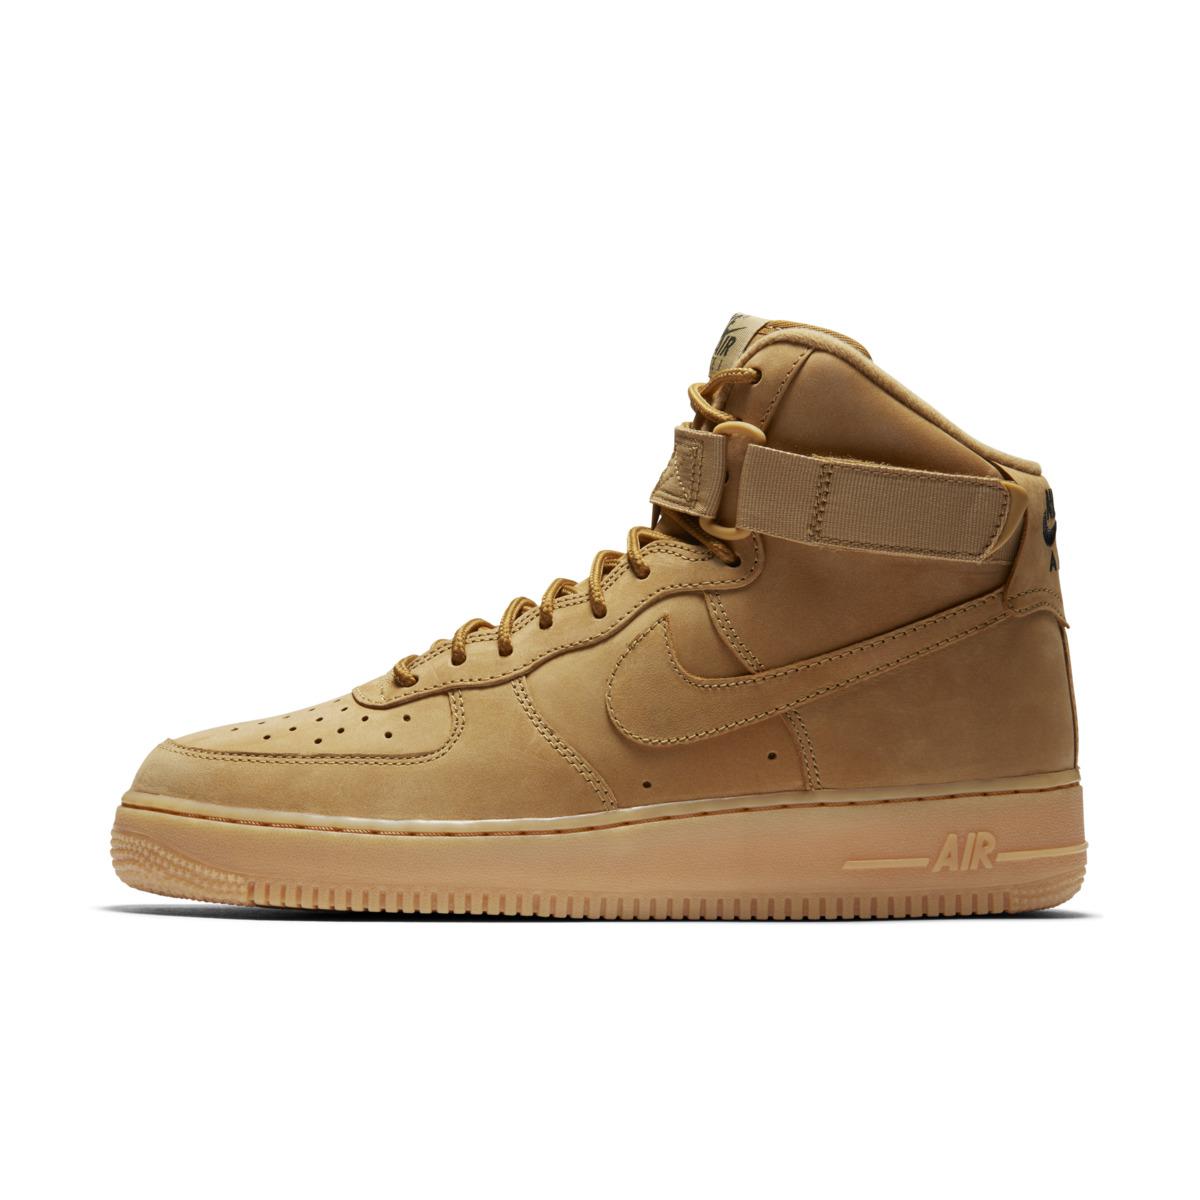 Nike Leather Air Force 1 High 07 Lv8 Wb Men's Shoe in Brown for Men - Lyst